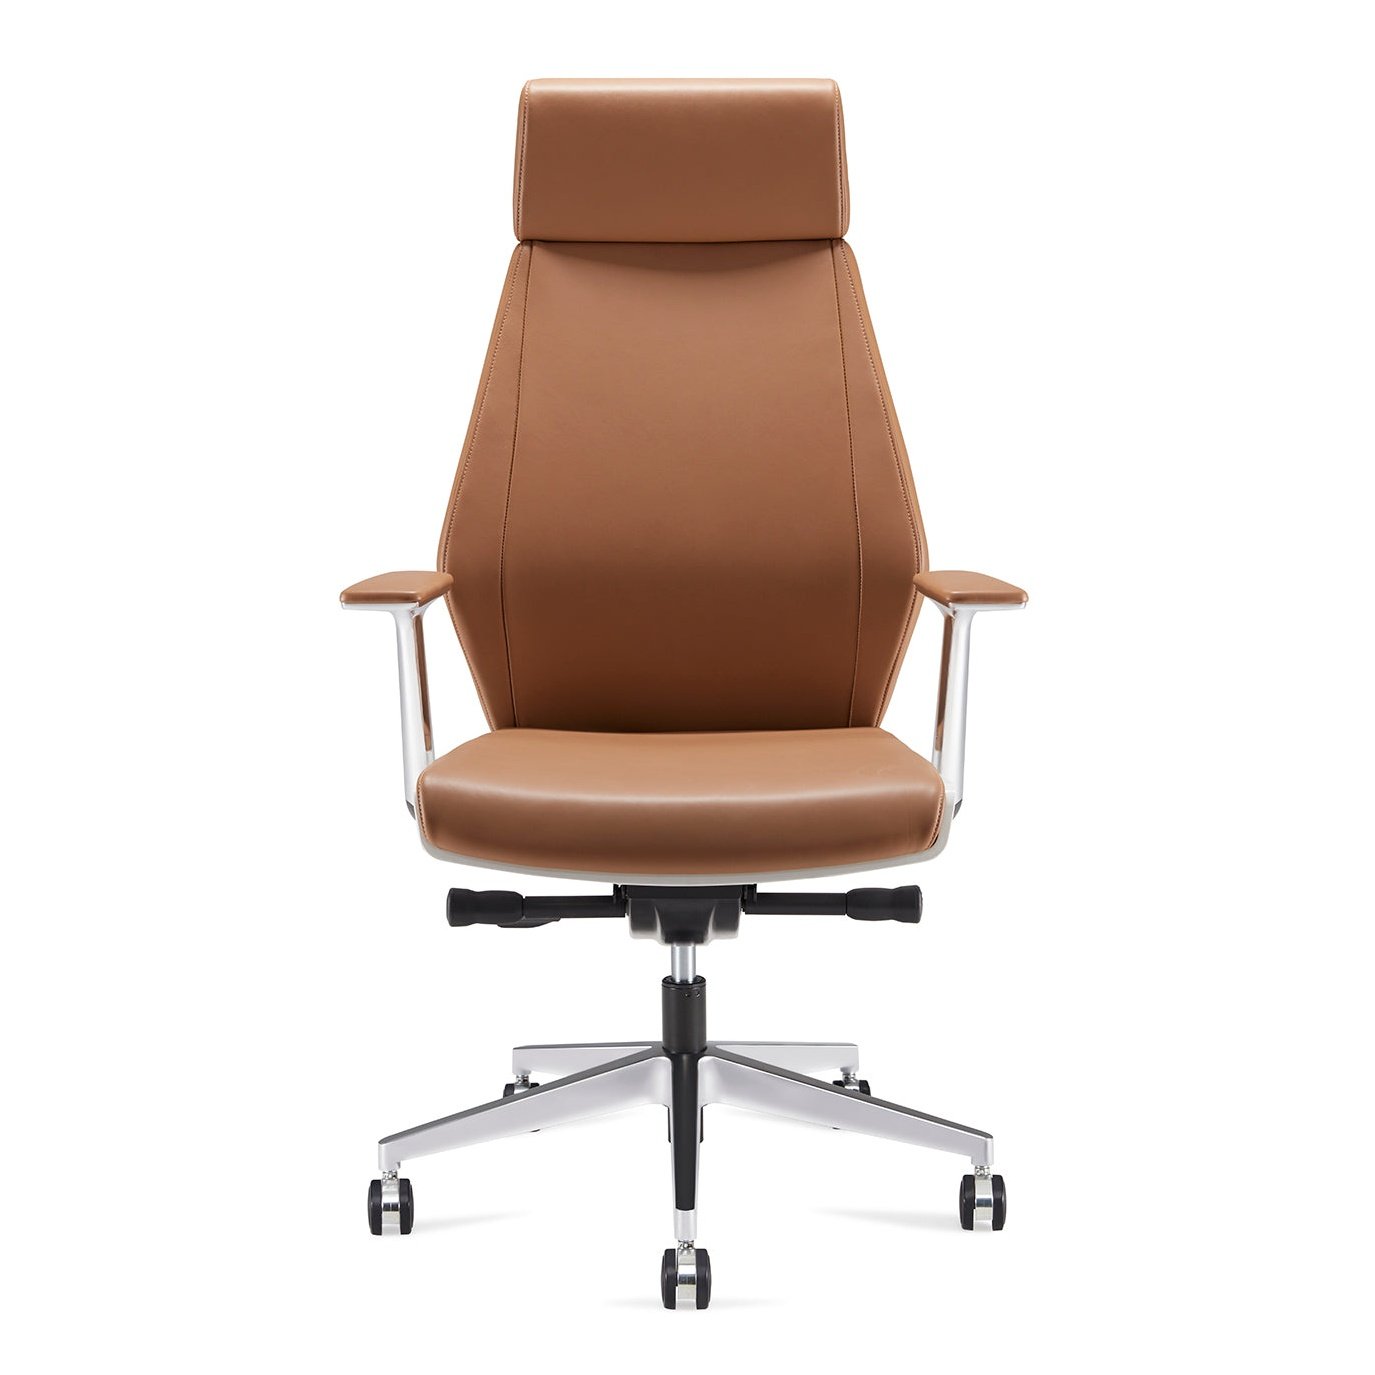 Evolve Leather Executive Office Chair